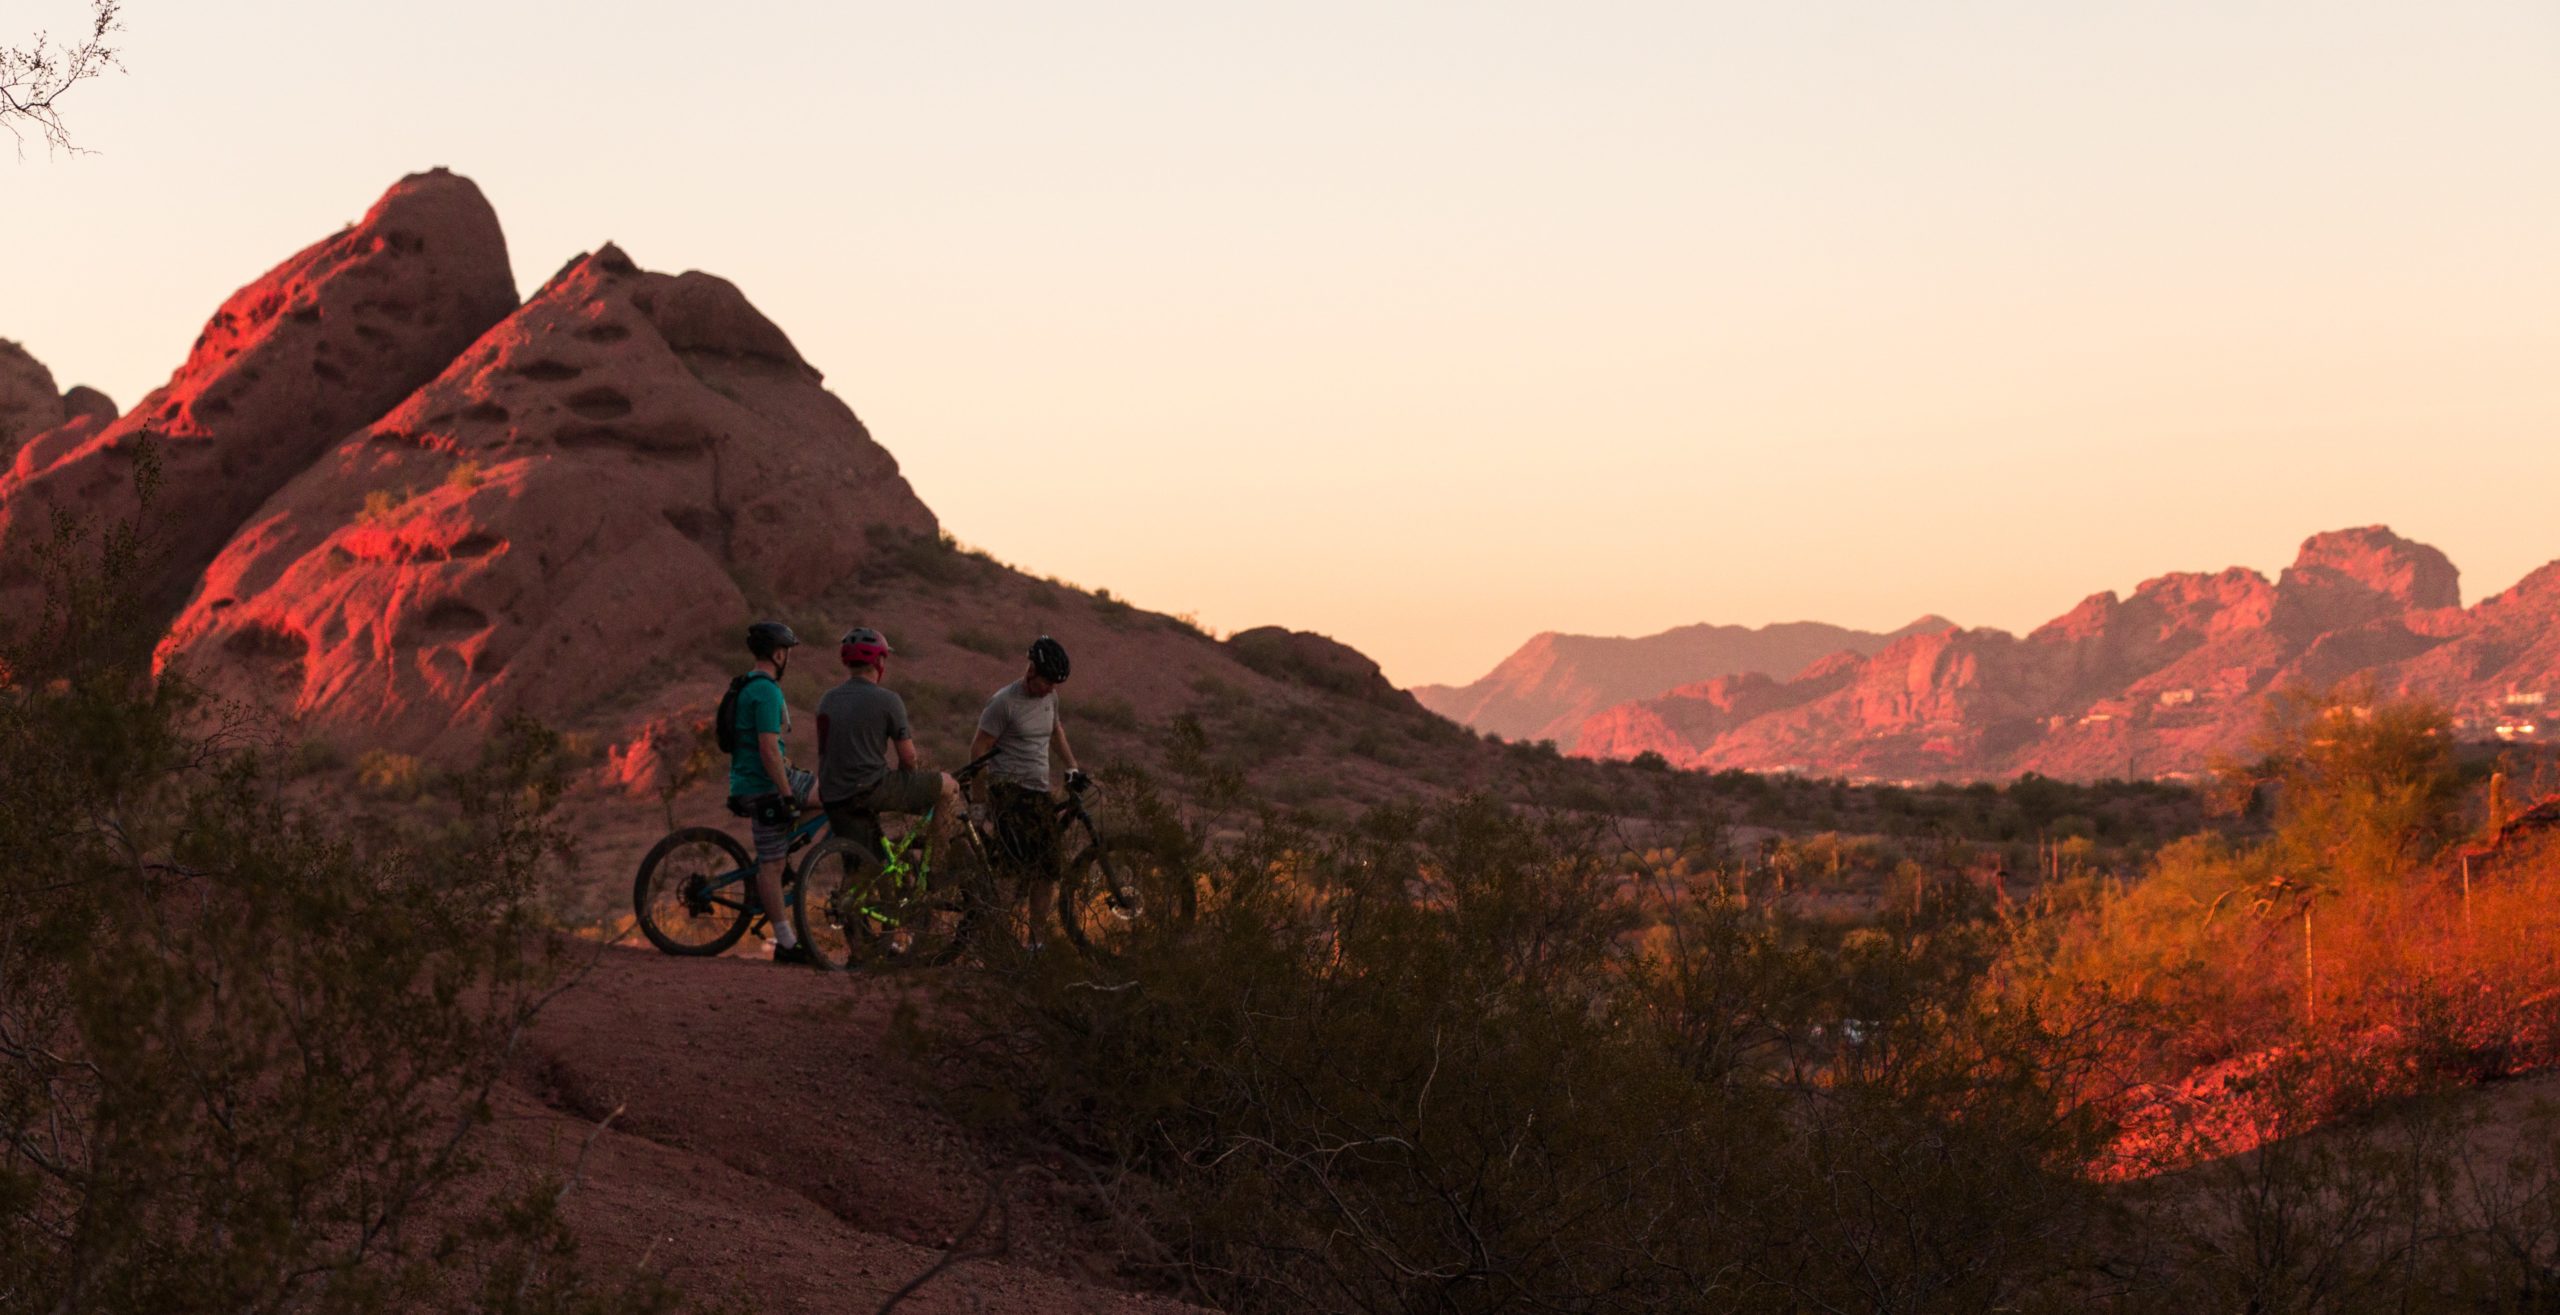 3 people riding bikes at sunset with mountains in the background and red rock all around while on a mountain bike tour.